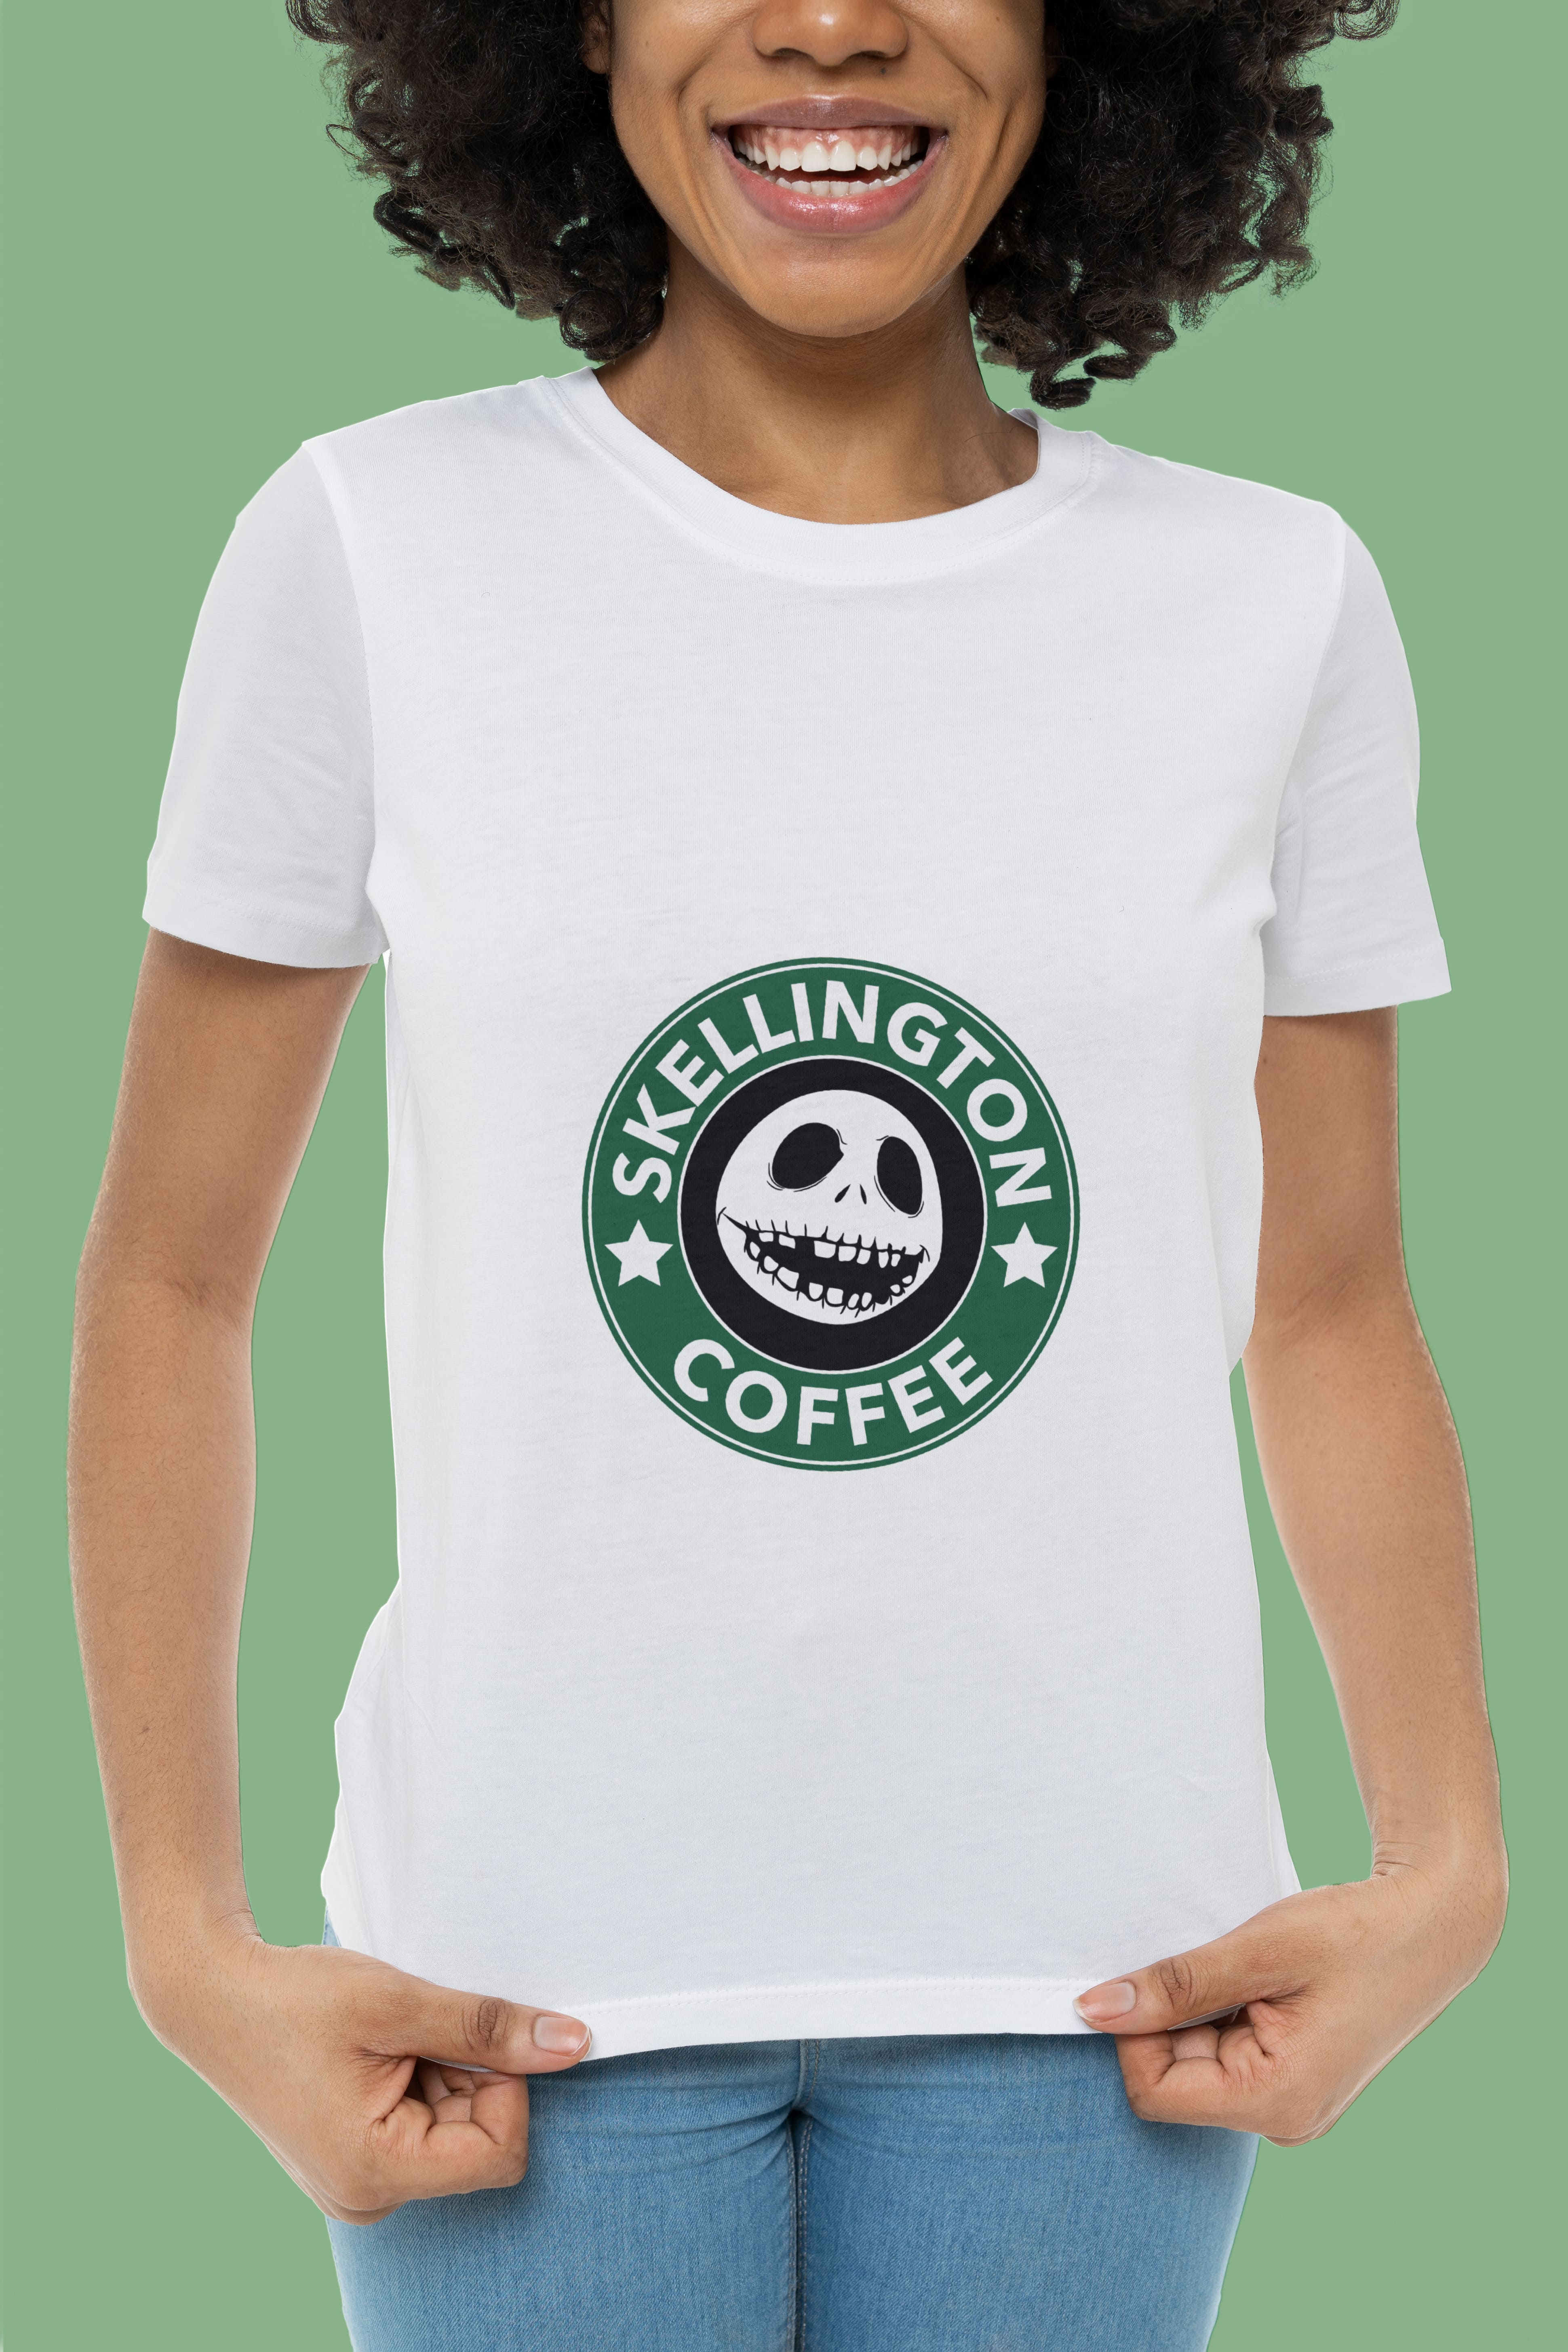 White t-shirt with green-black round illustration with skellington on a girl.